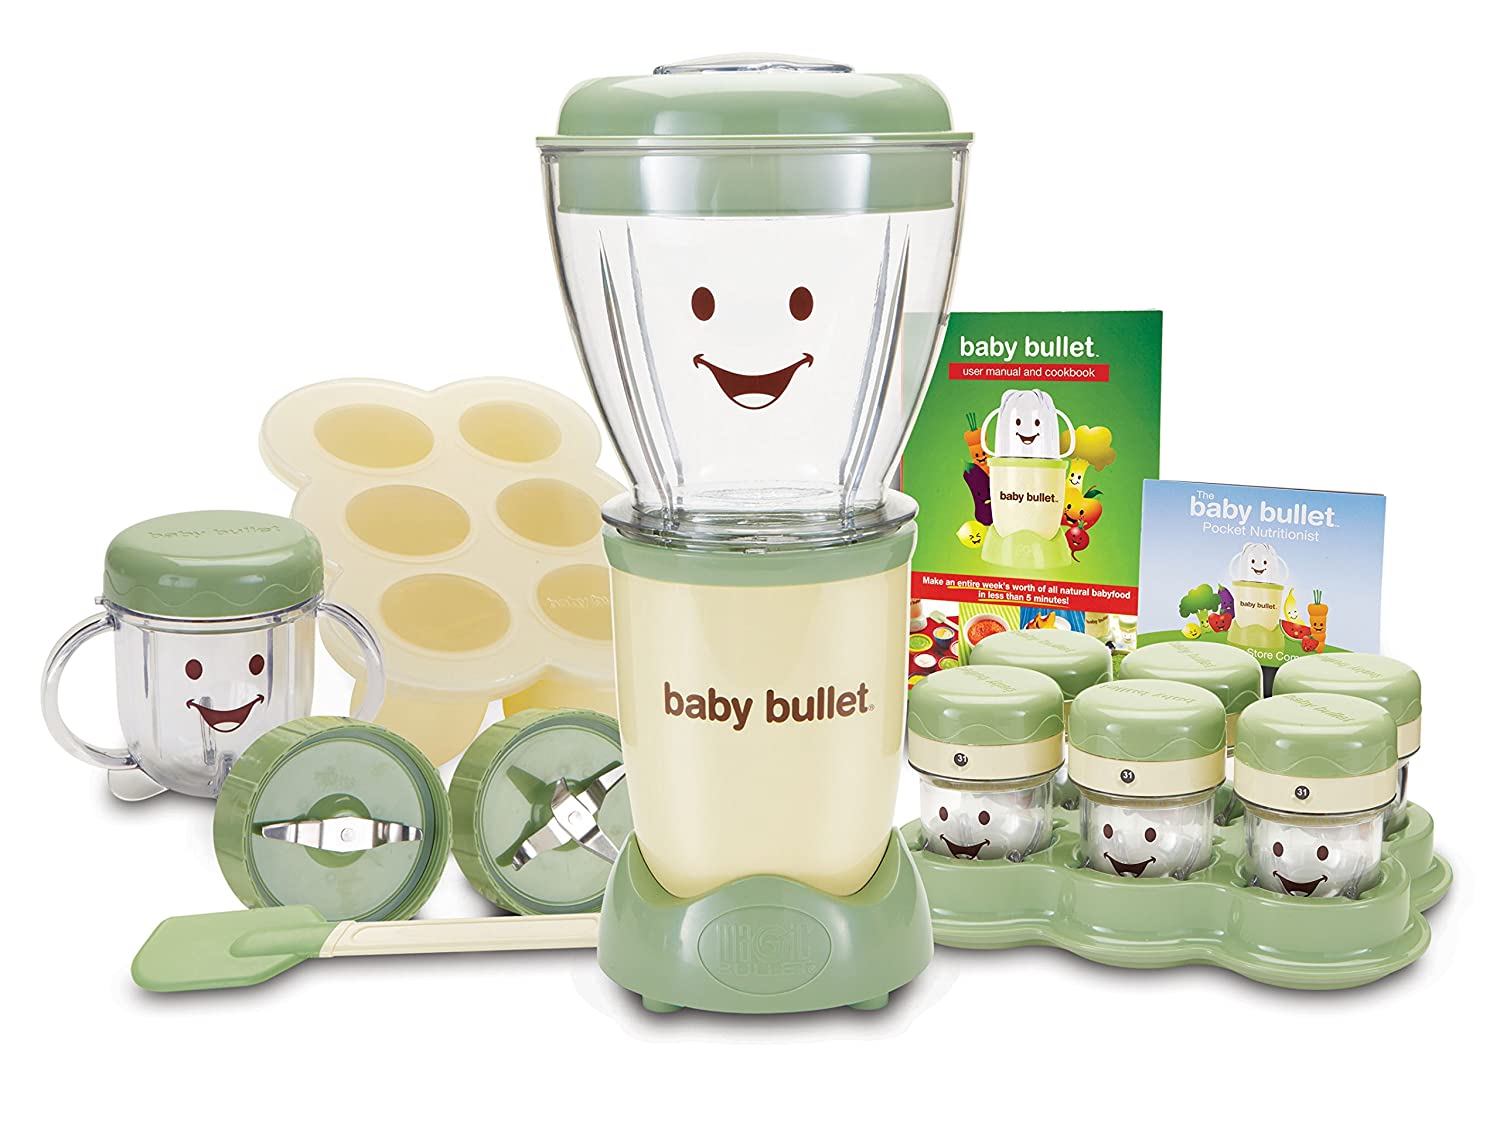 8 Best Food Processors for Baby Food 2022 - Buying Guide 5